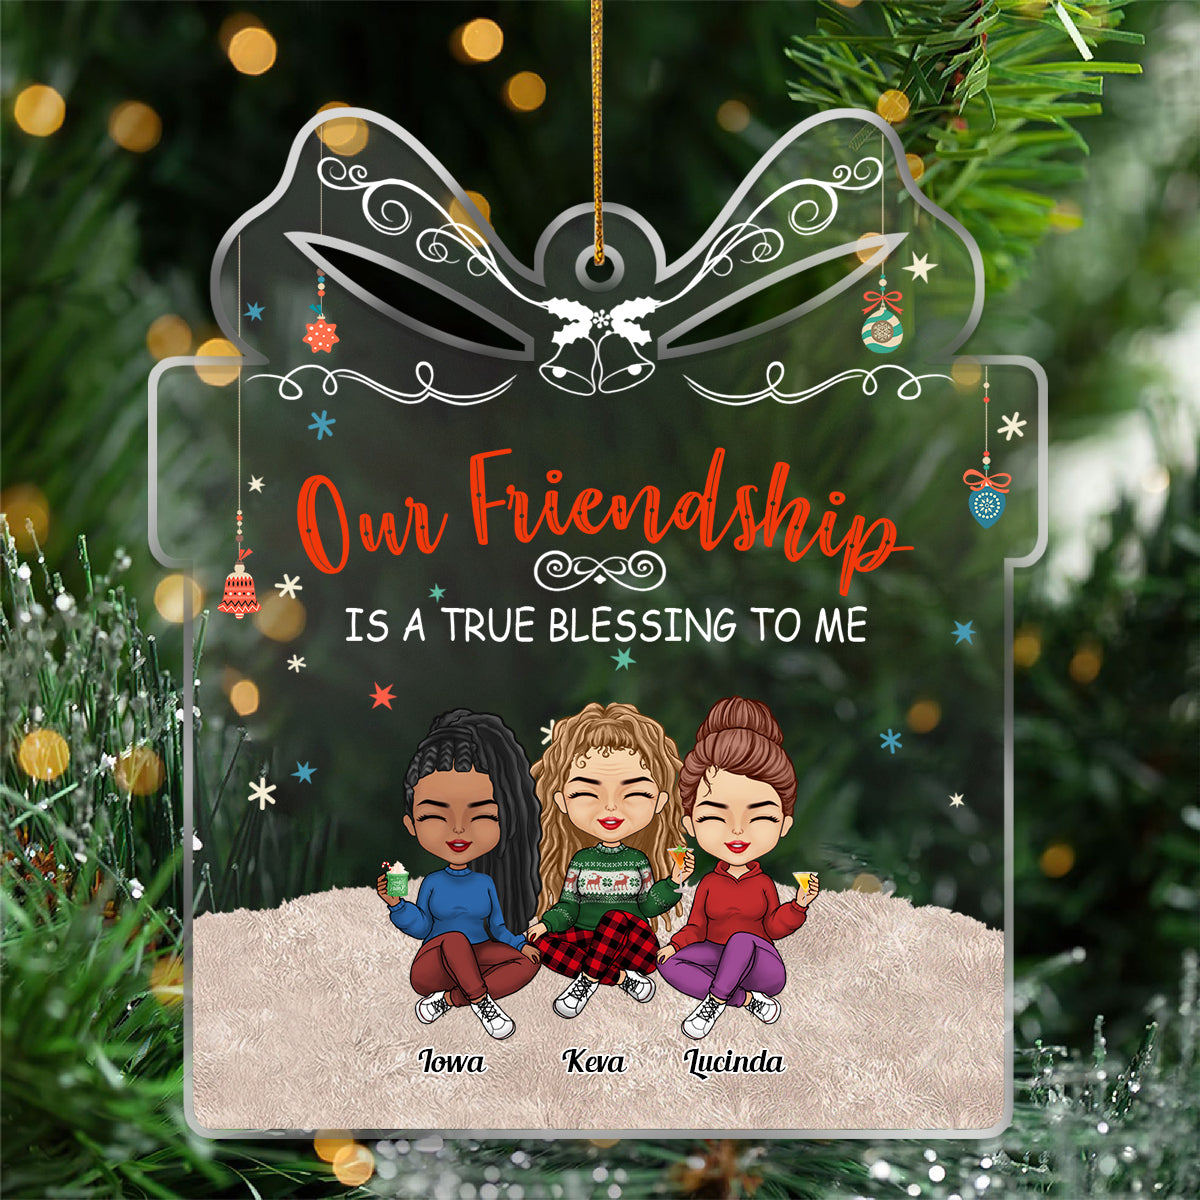 Our Friendship Is A True Blessing To Me - Personalized Acrylic Ornament